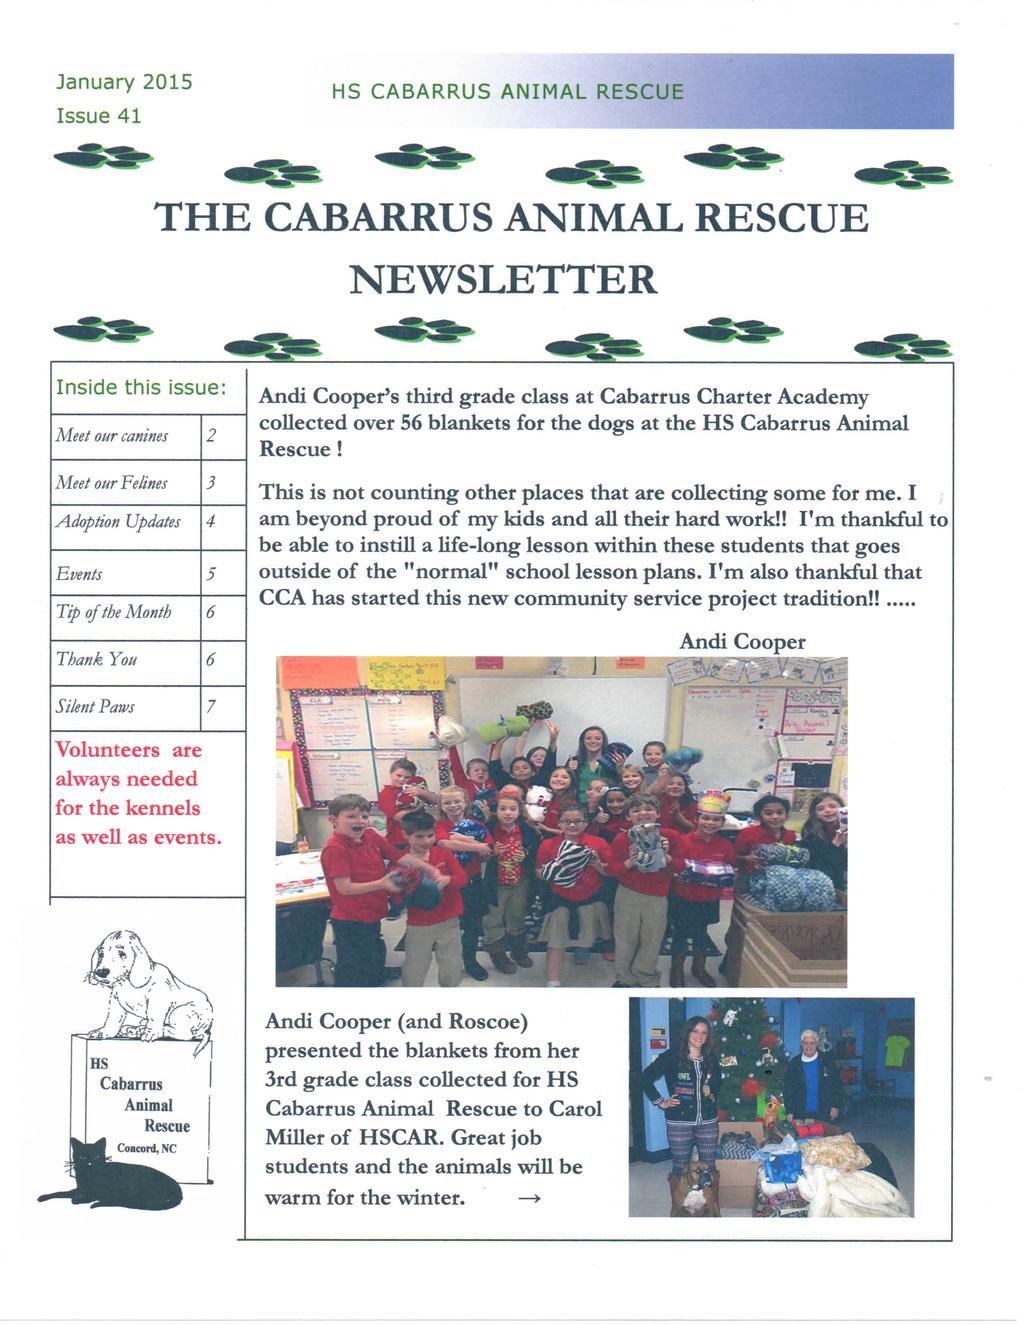 January 2015 Issue 41 HS CABARRUS ANIMAL RESCUE THE CABARRUS ANIMAL RESCUE NEWSLETTER Inside this issue: Meet our canines 2 Meet our Felines 3 Adoption Updates 4 Events 5 Tip of the Month 6 Thank You